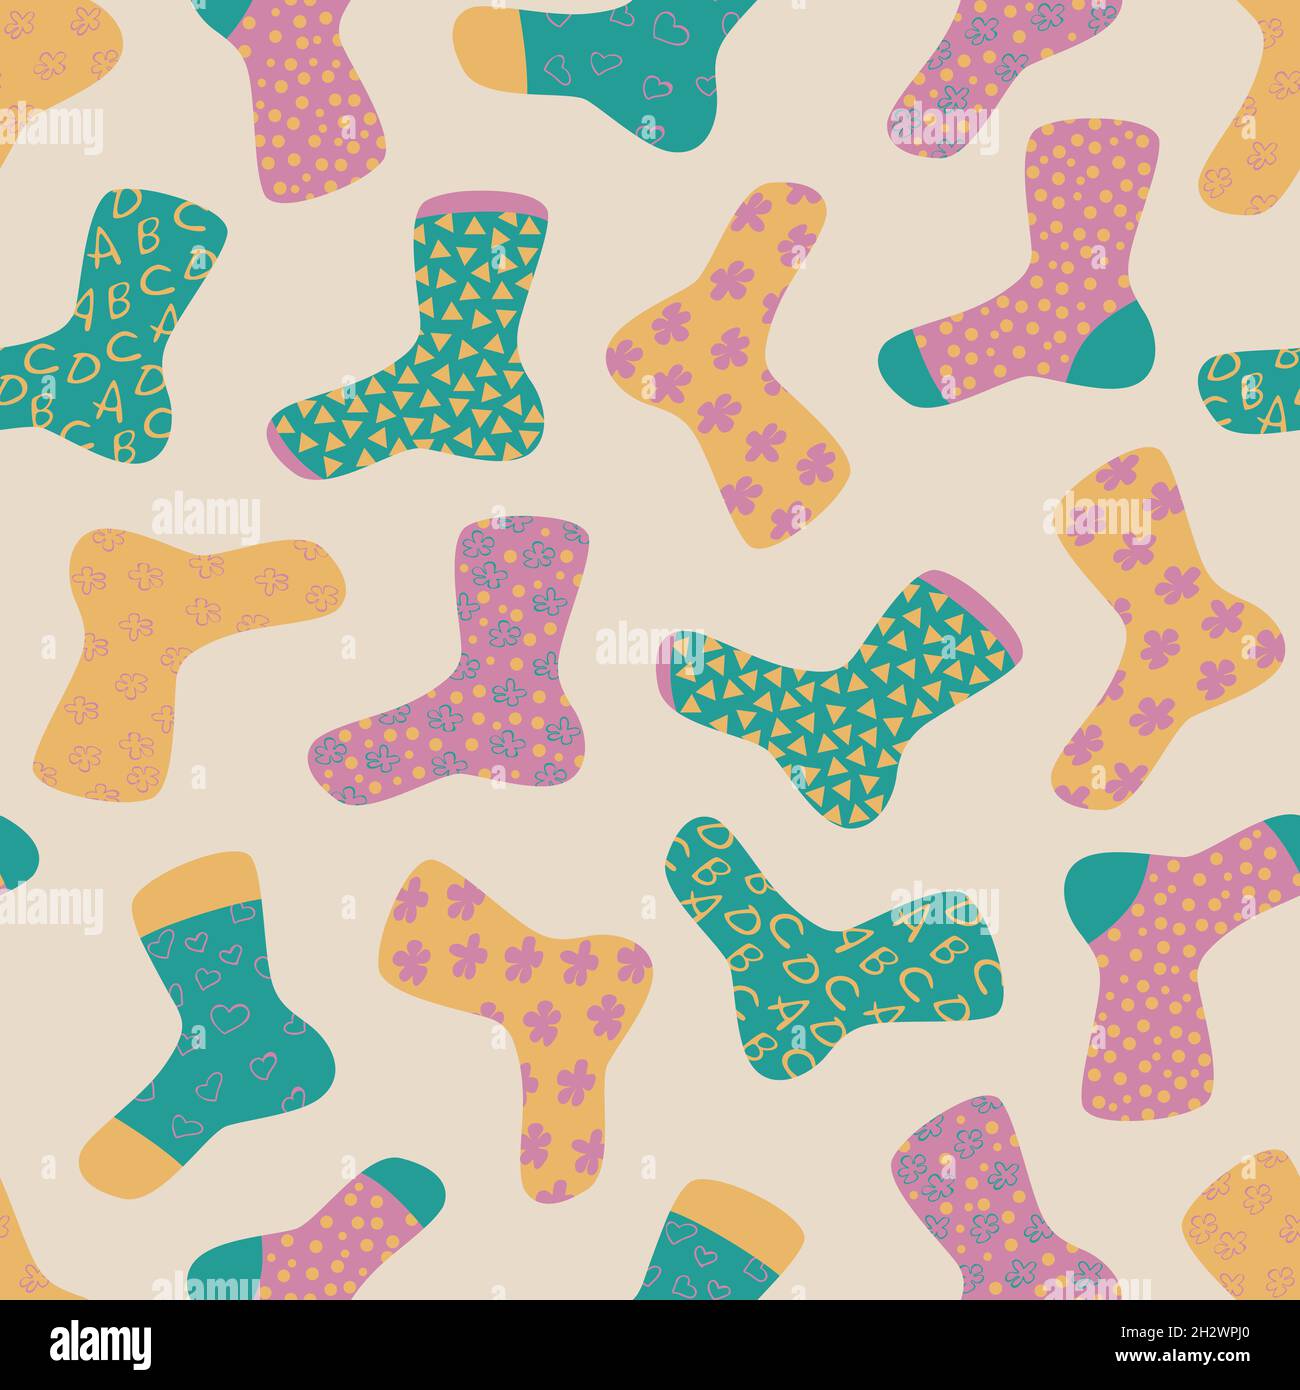 Vector seamless pattern with socks in cartoon style. Different variants of socks design - letters, dots, hearts, triangles, flowers. Stock Vector